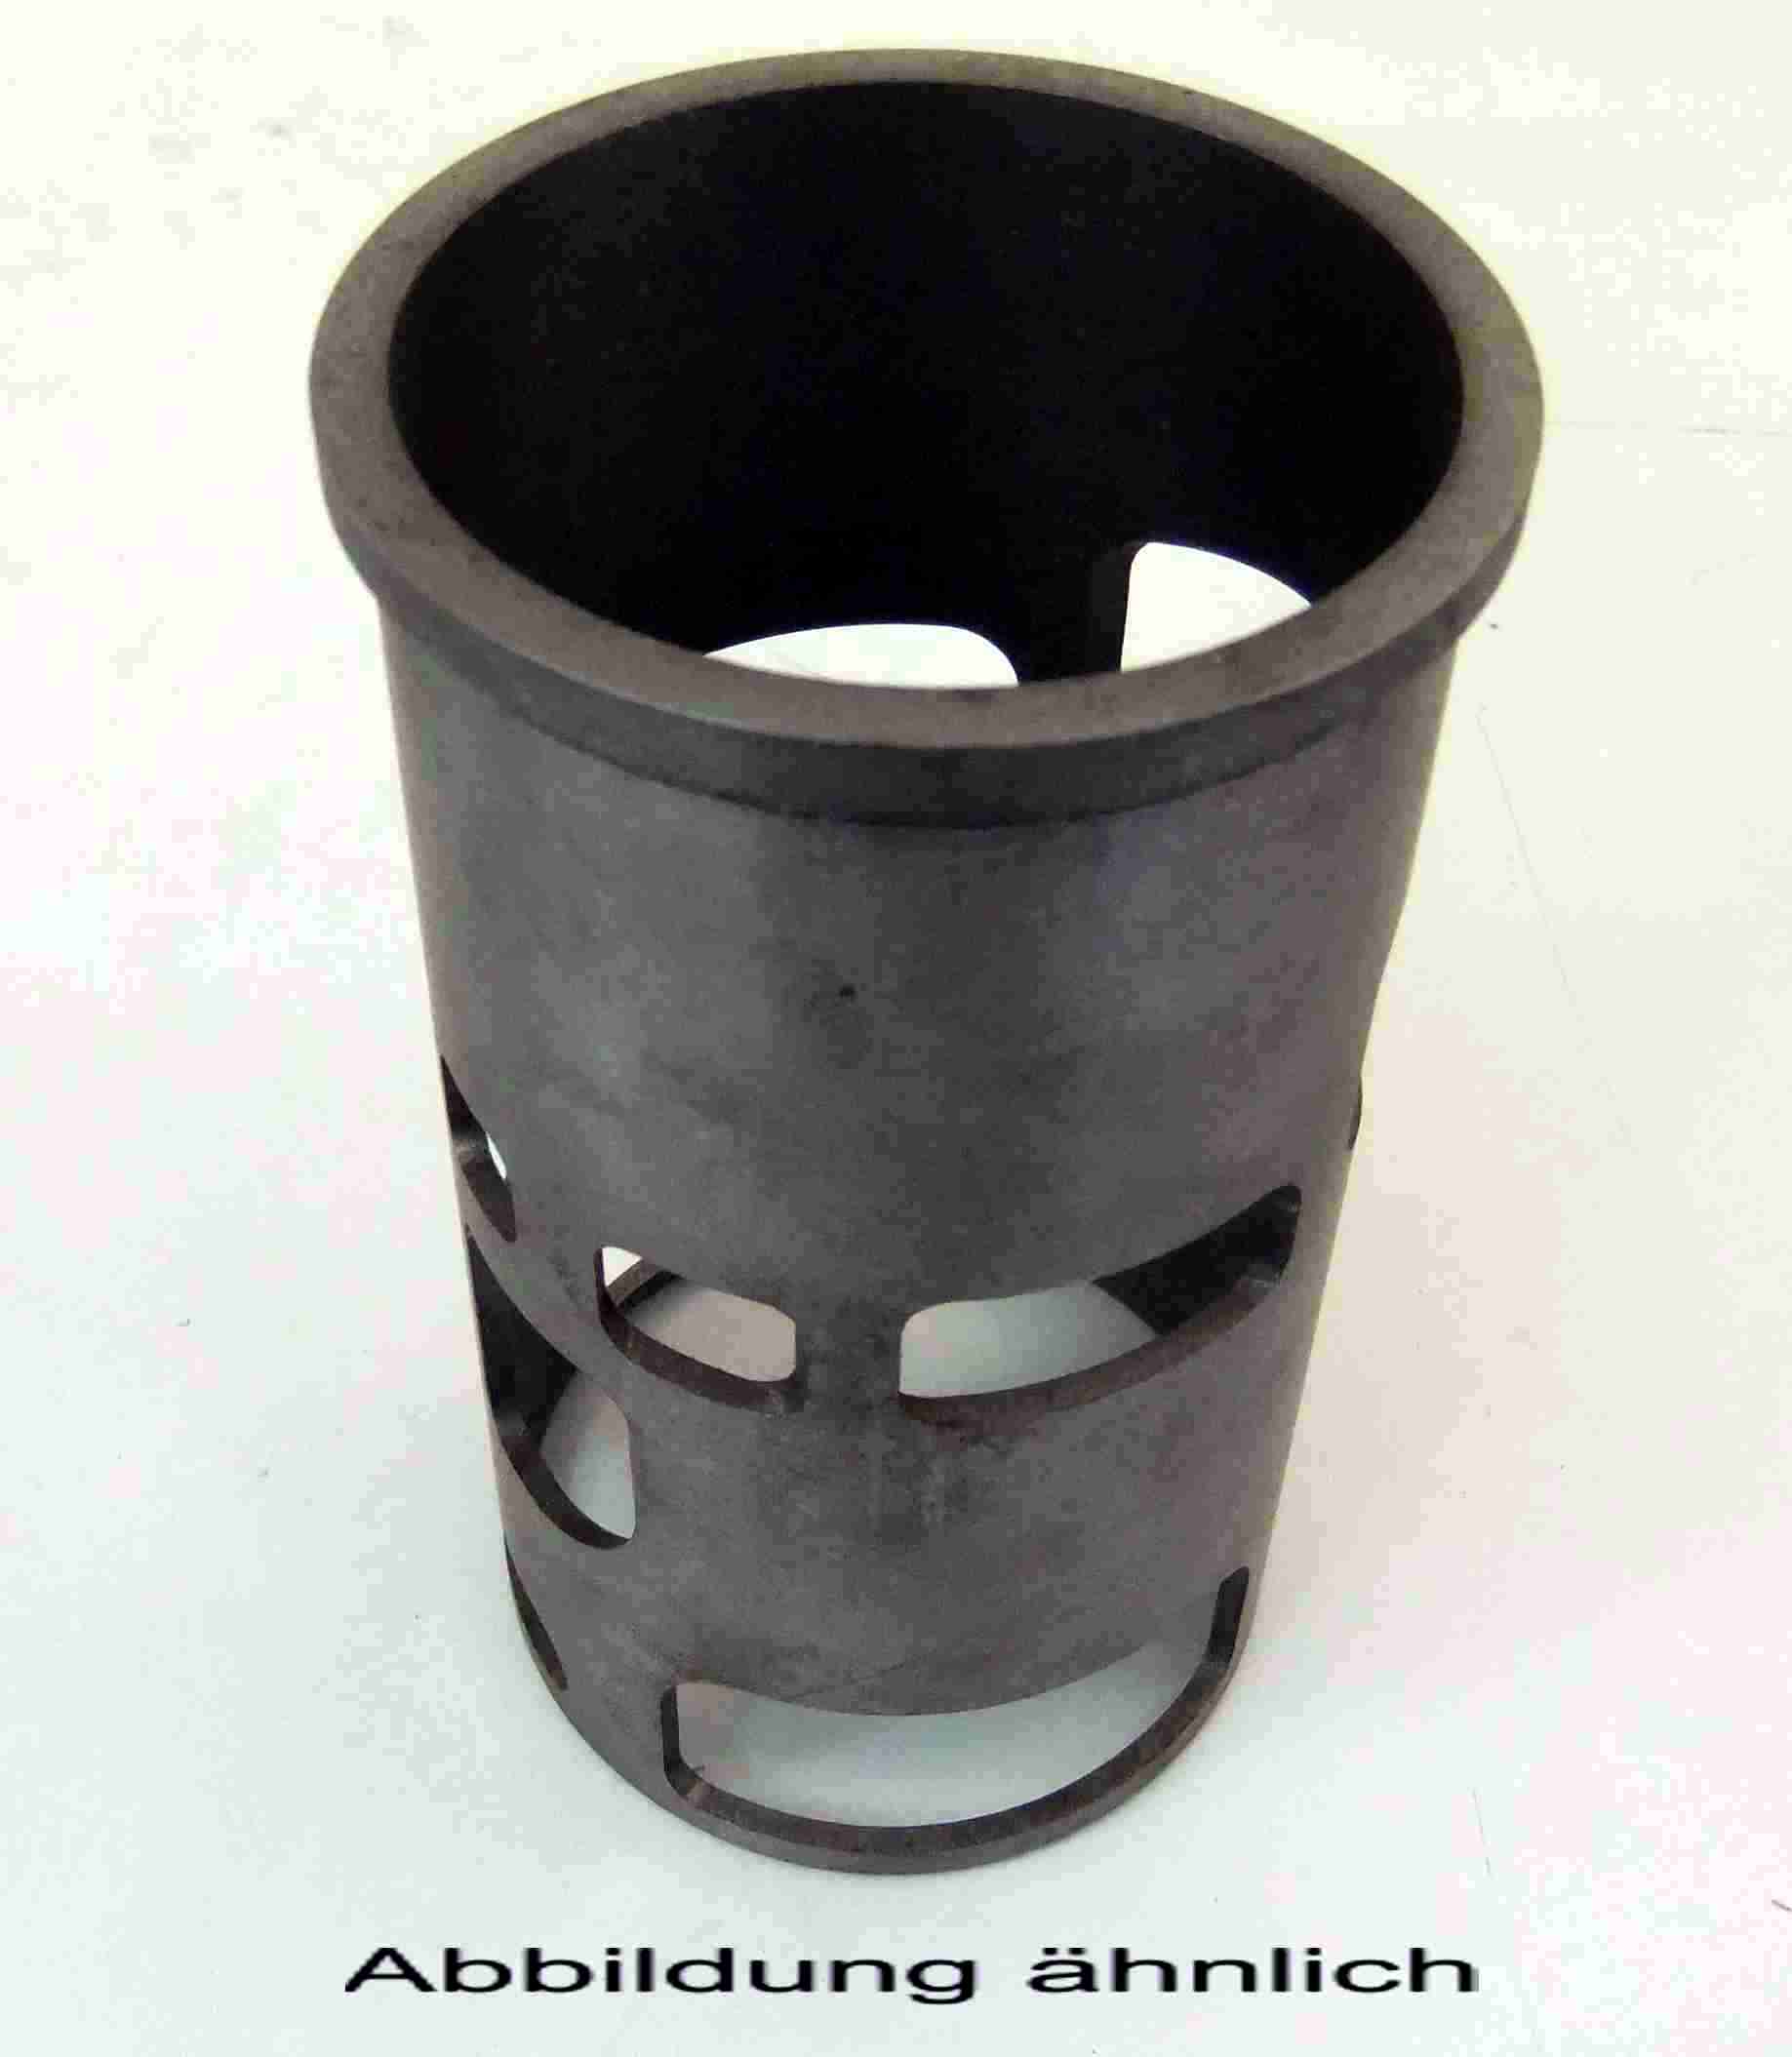 SCHREMS CYLINDER SLEEVES OF SPECIAL STEEL CASTING  66.40 MM